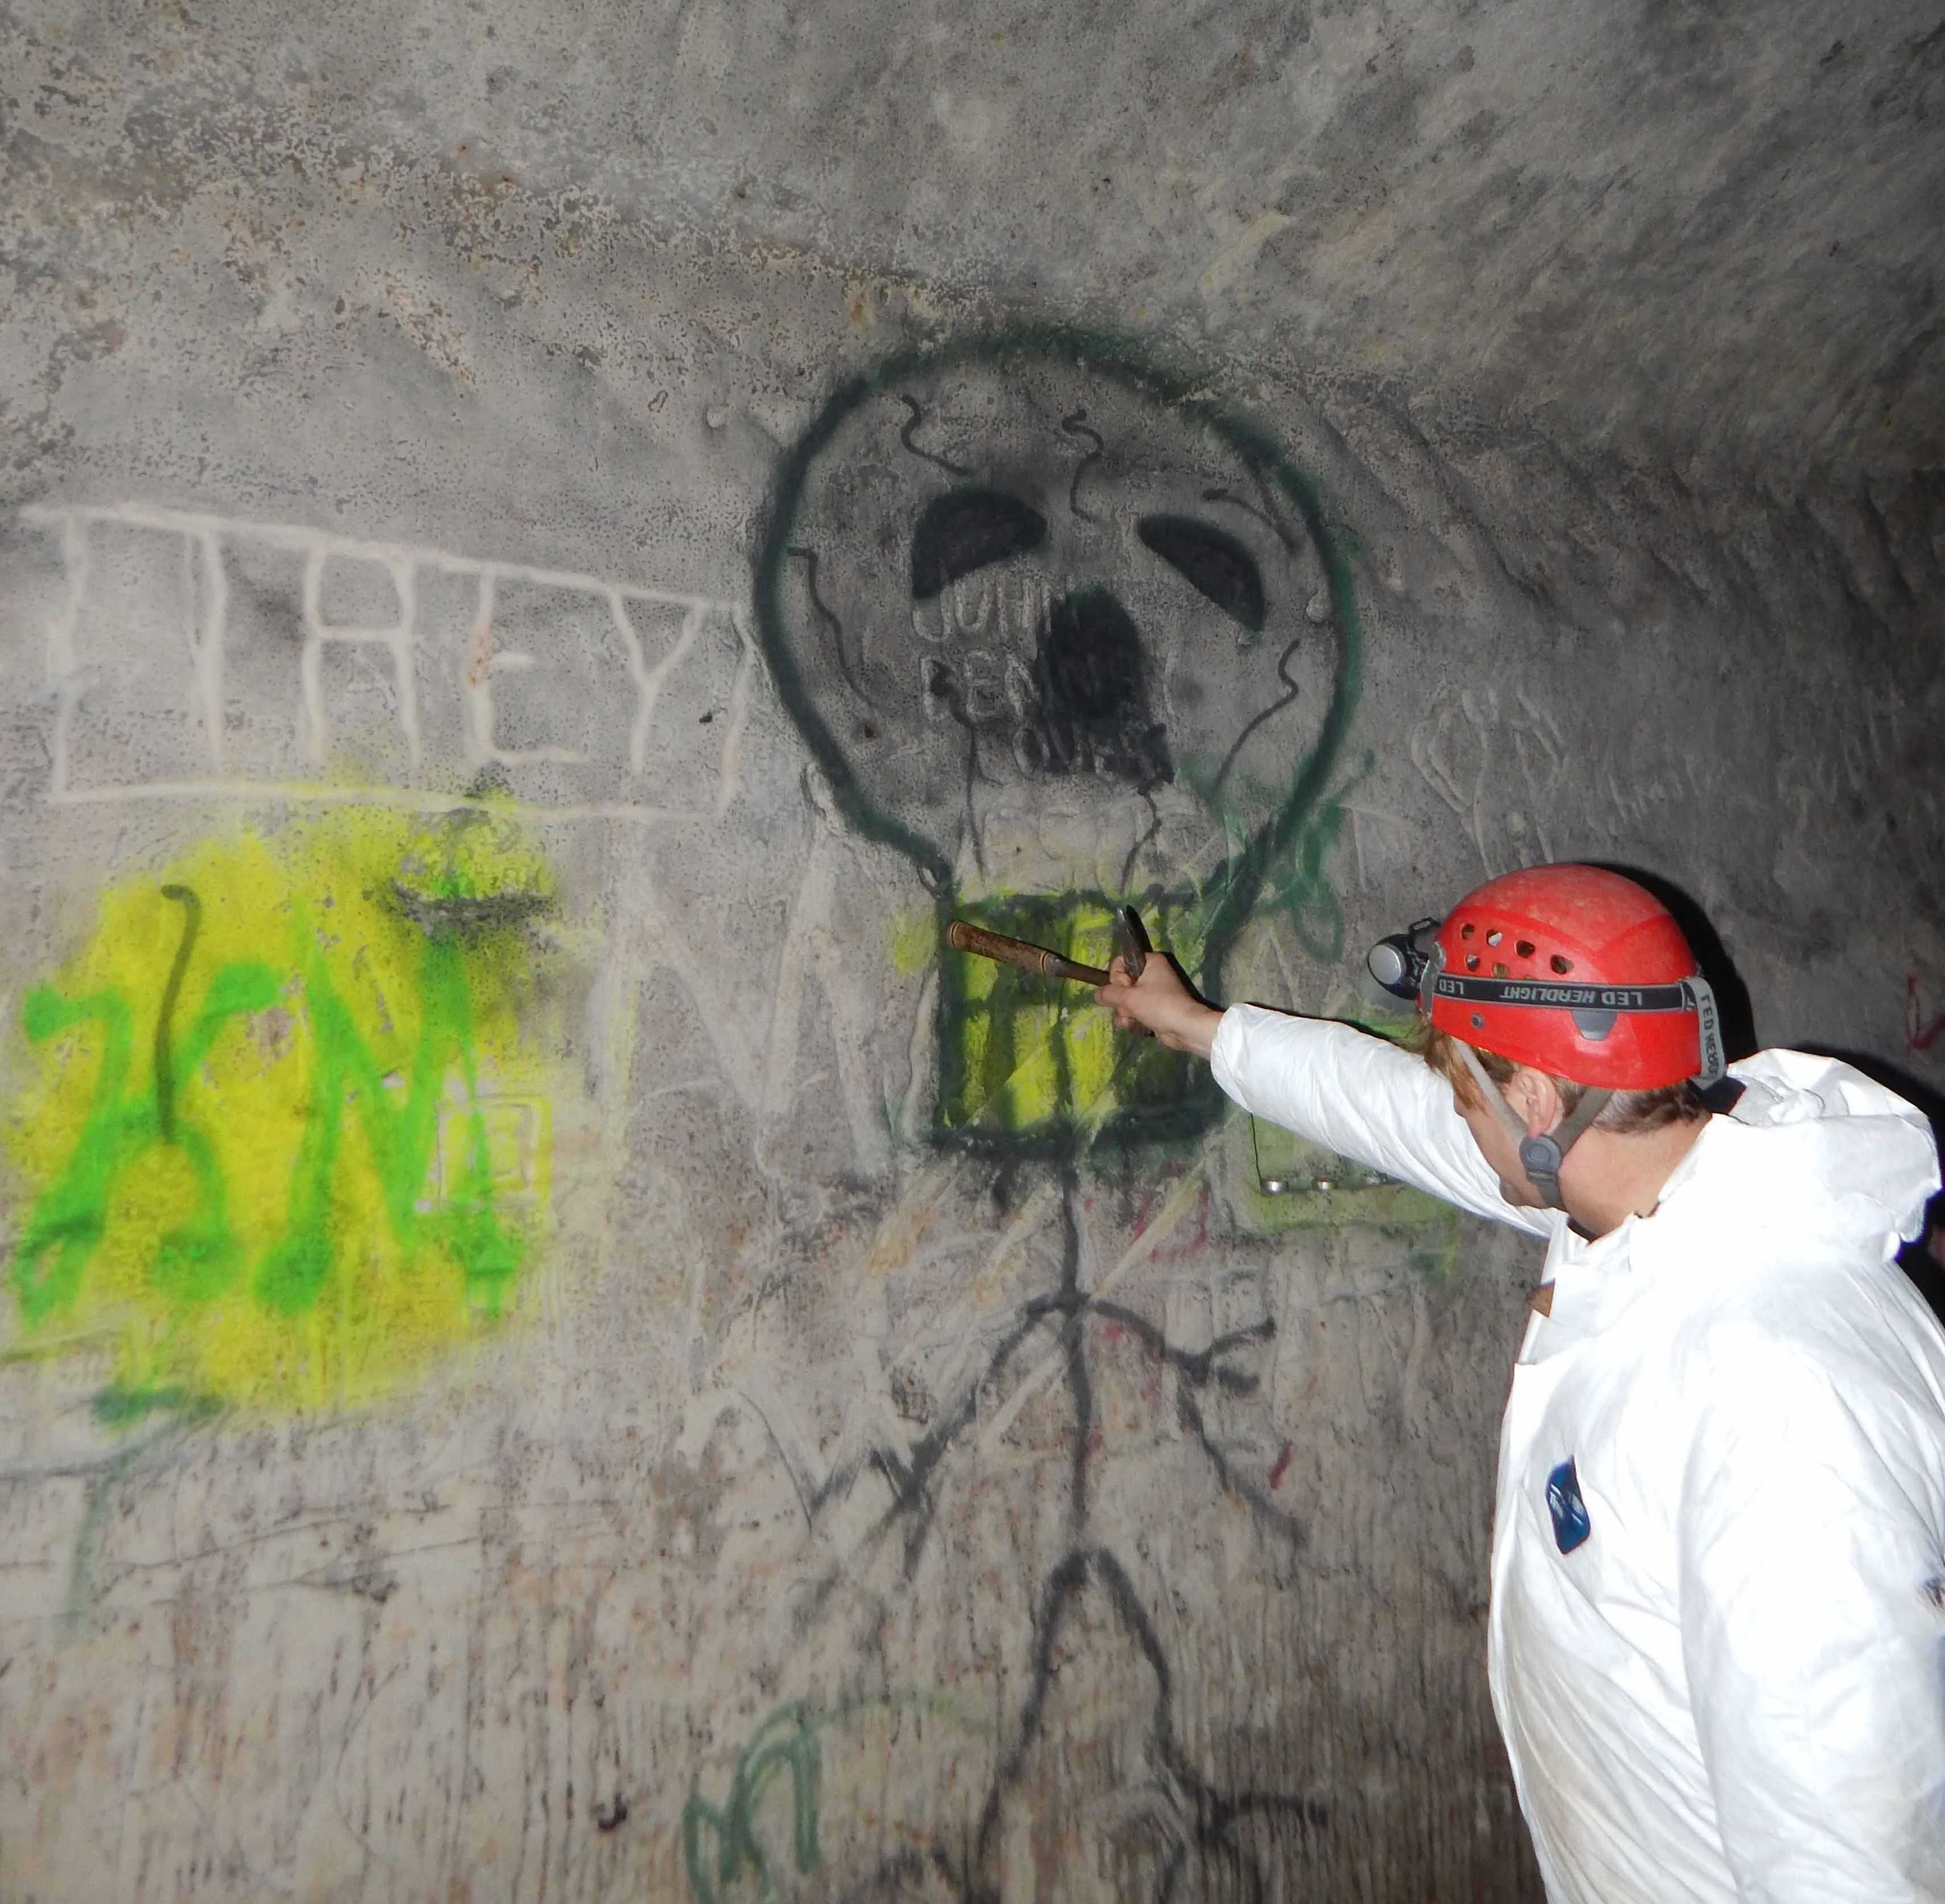 Skull spray painted on walls of Banholzer Cave